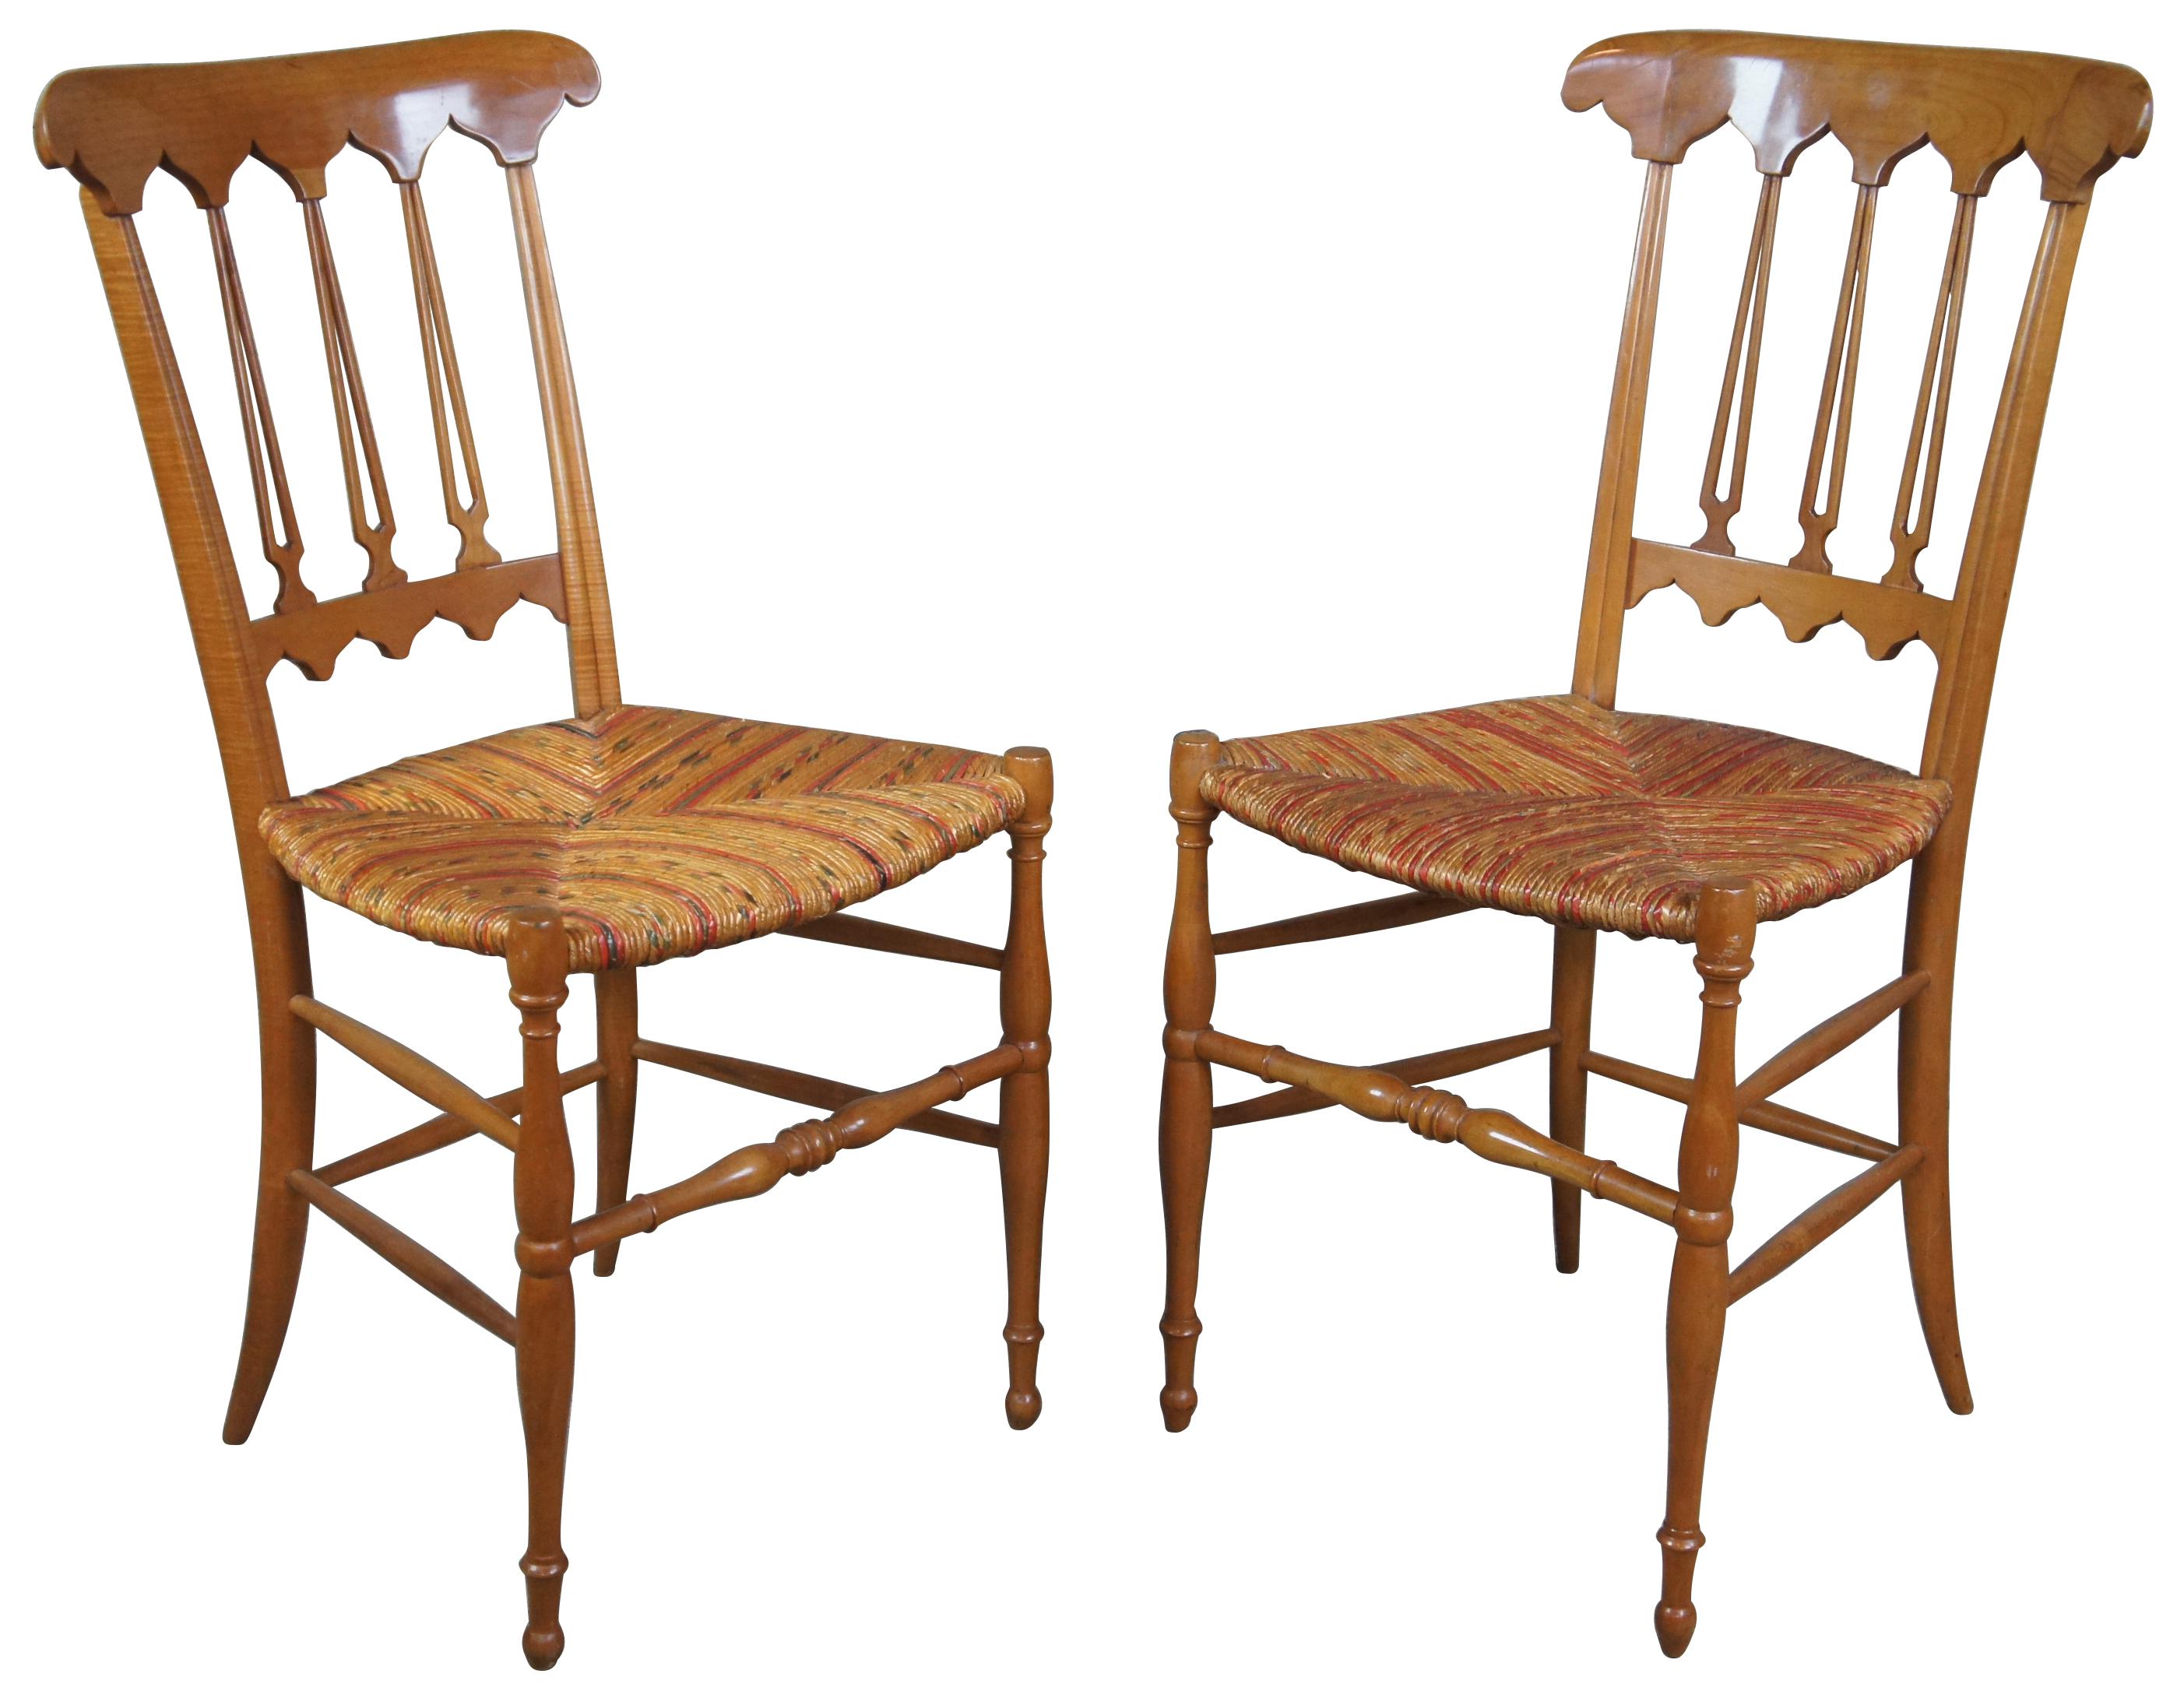 Pair of two Italian Chiavari Biedermeier parlor chairs. Made from solid maple with a shaped back and Gothic style arcade design leading to split spindles. Seats covered in multi-color wicker pattern.